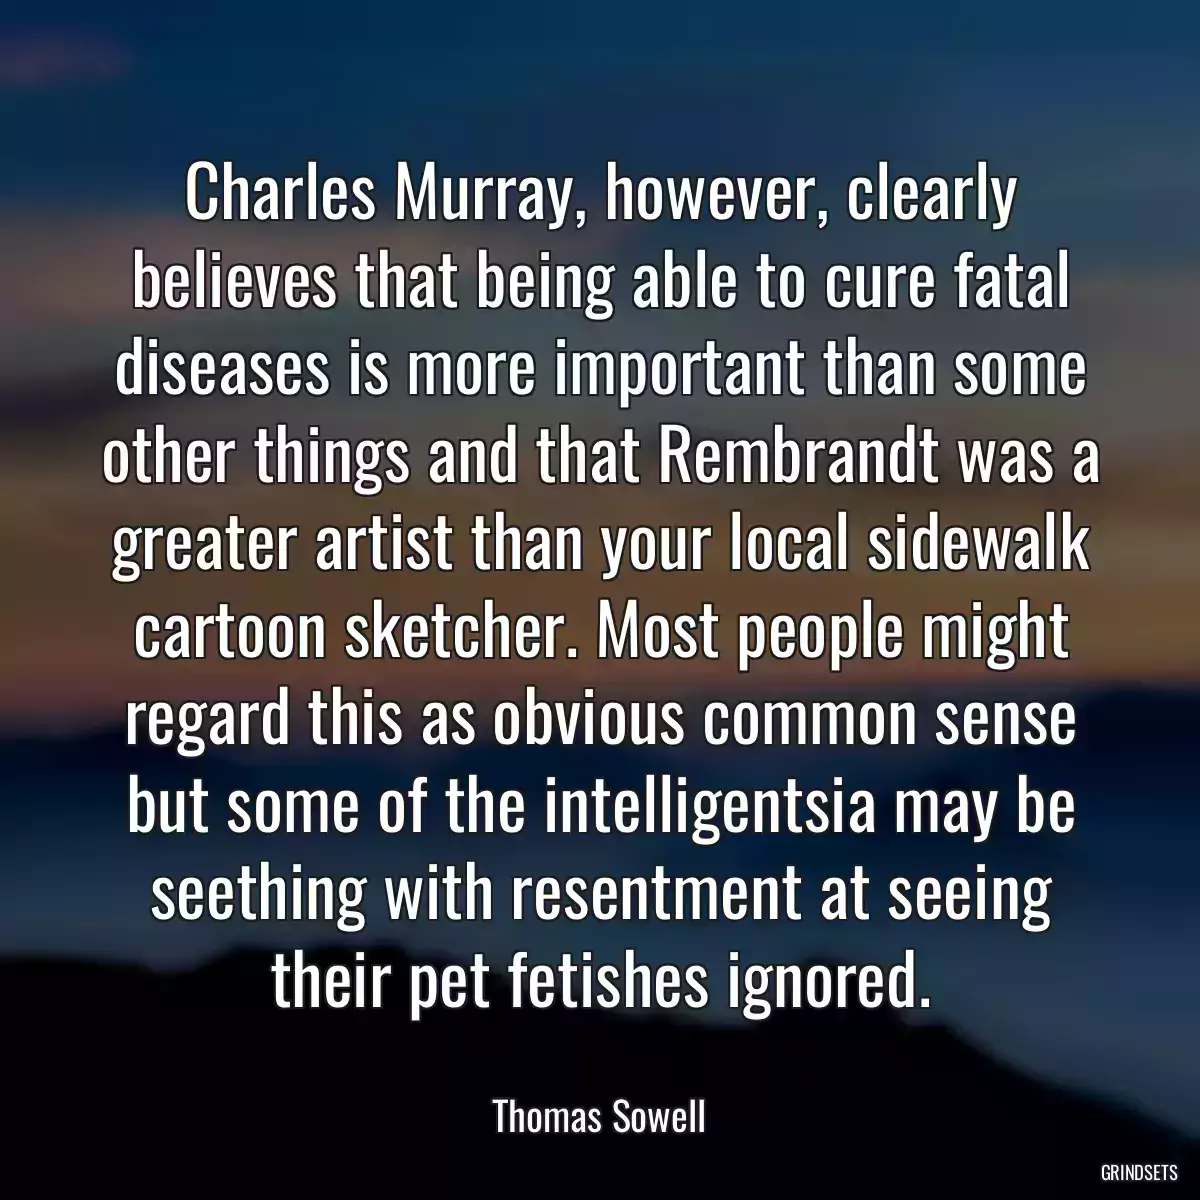 Charles Murray, however, clearly believes that being able to cure fatal diseases is more important than some other things and that Rembrandt was a greater artist than your local sidewalk cartoon sketcher. Most people might regard this as obvious common sense but some of the intelligentsia may be seething with resentment at seeing their pet fetishes ignored.